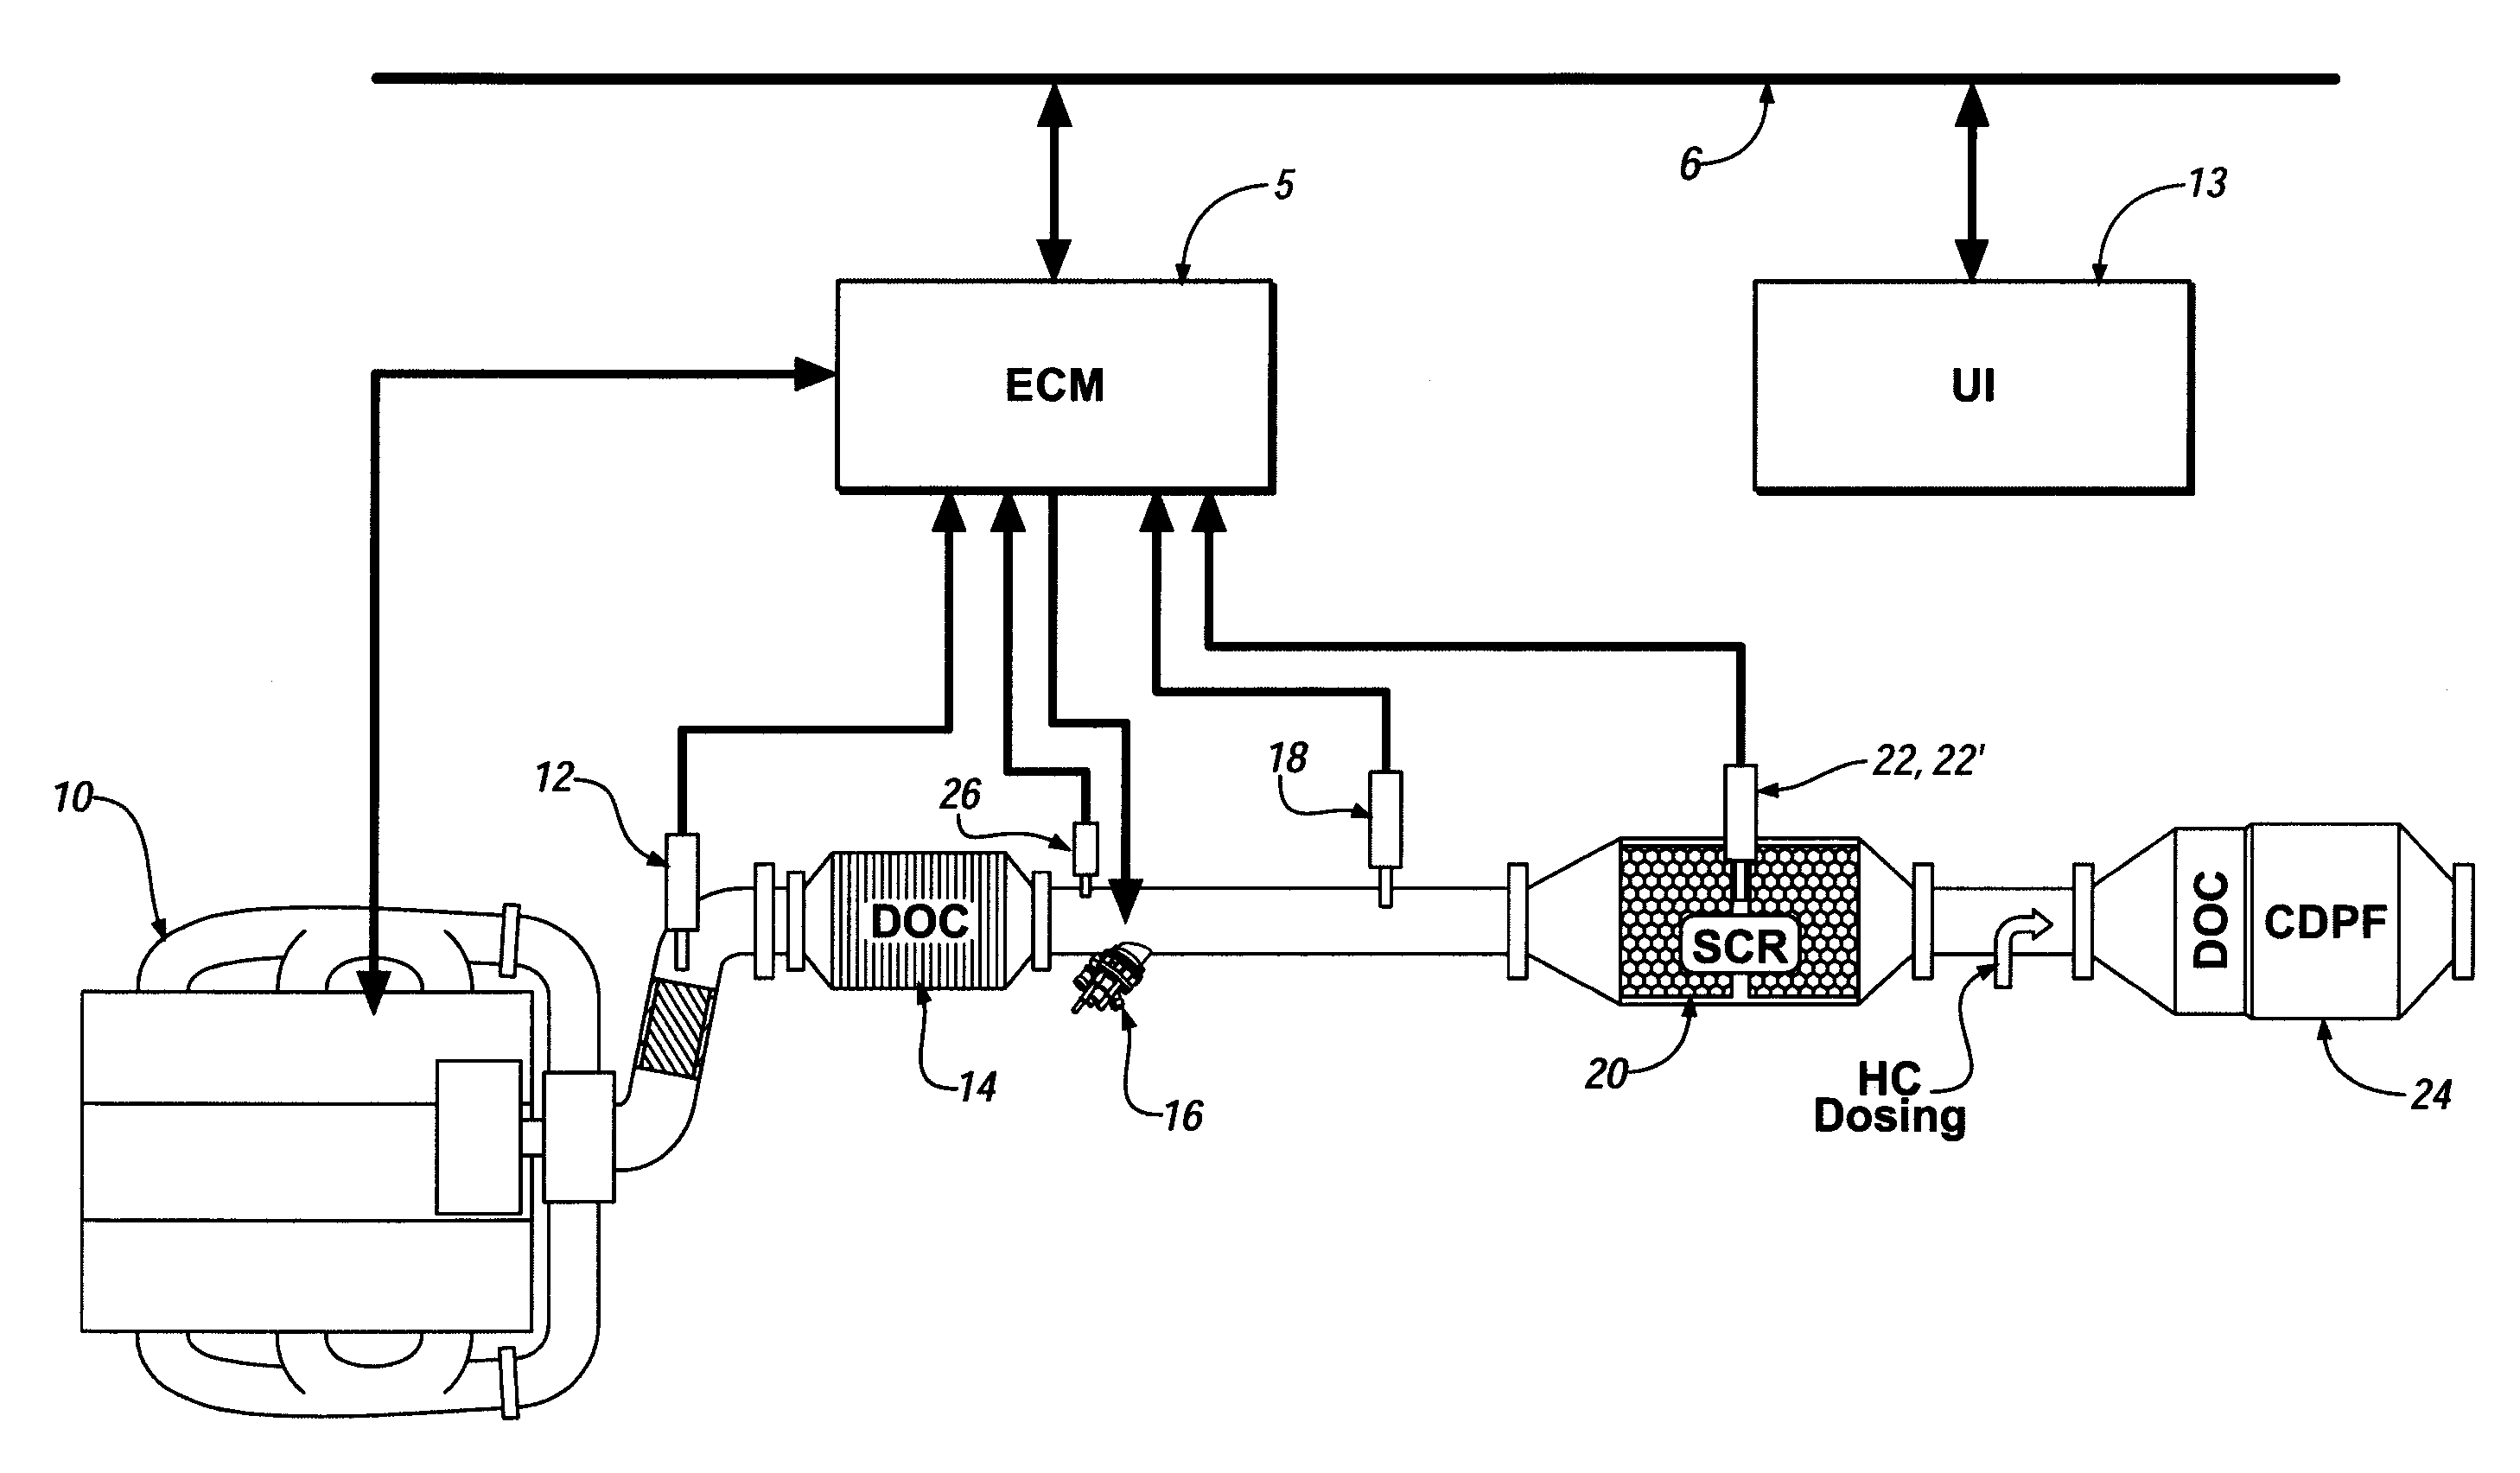 Method and Apparatus for Monitoring a Urea Injection System in an Exhaust Aftertreatment System